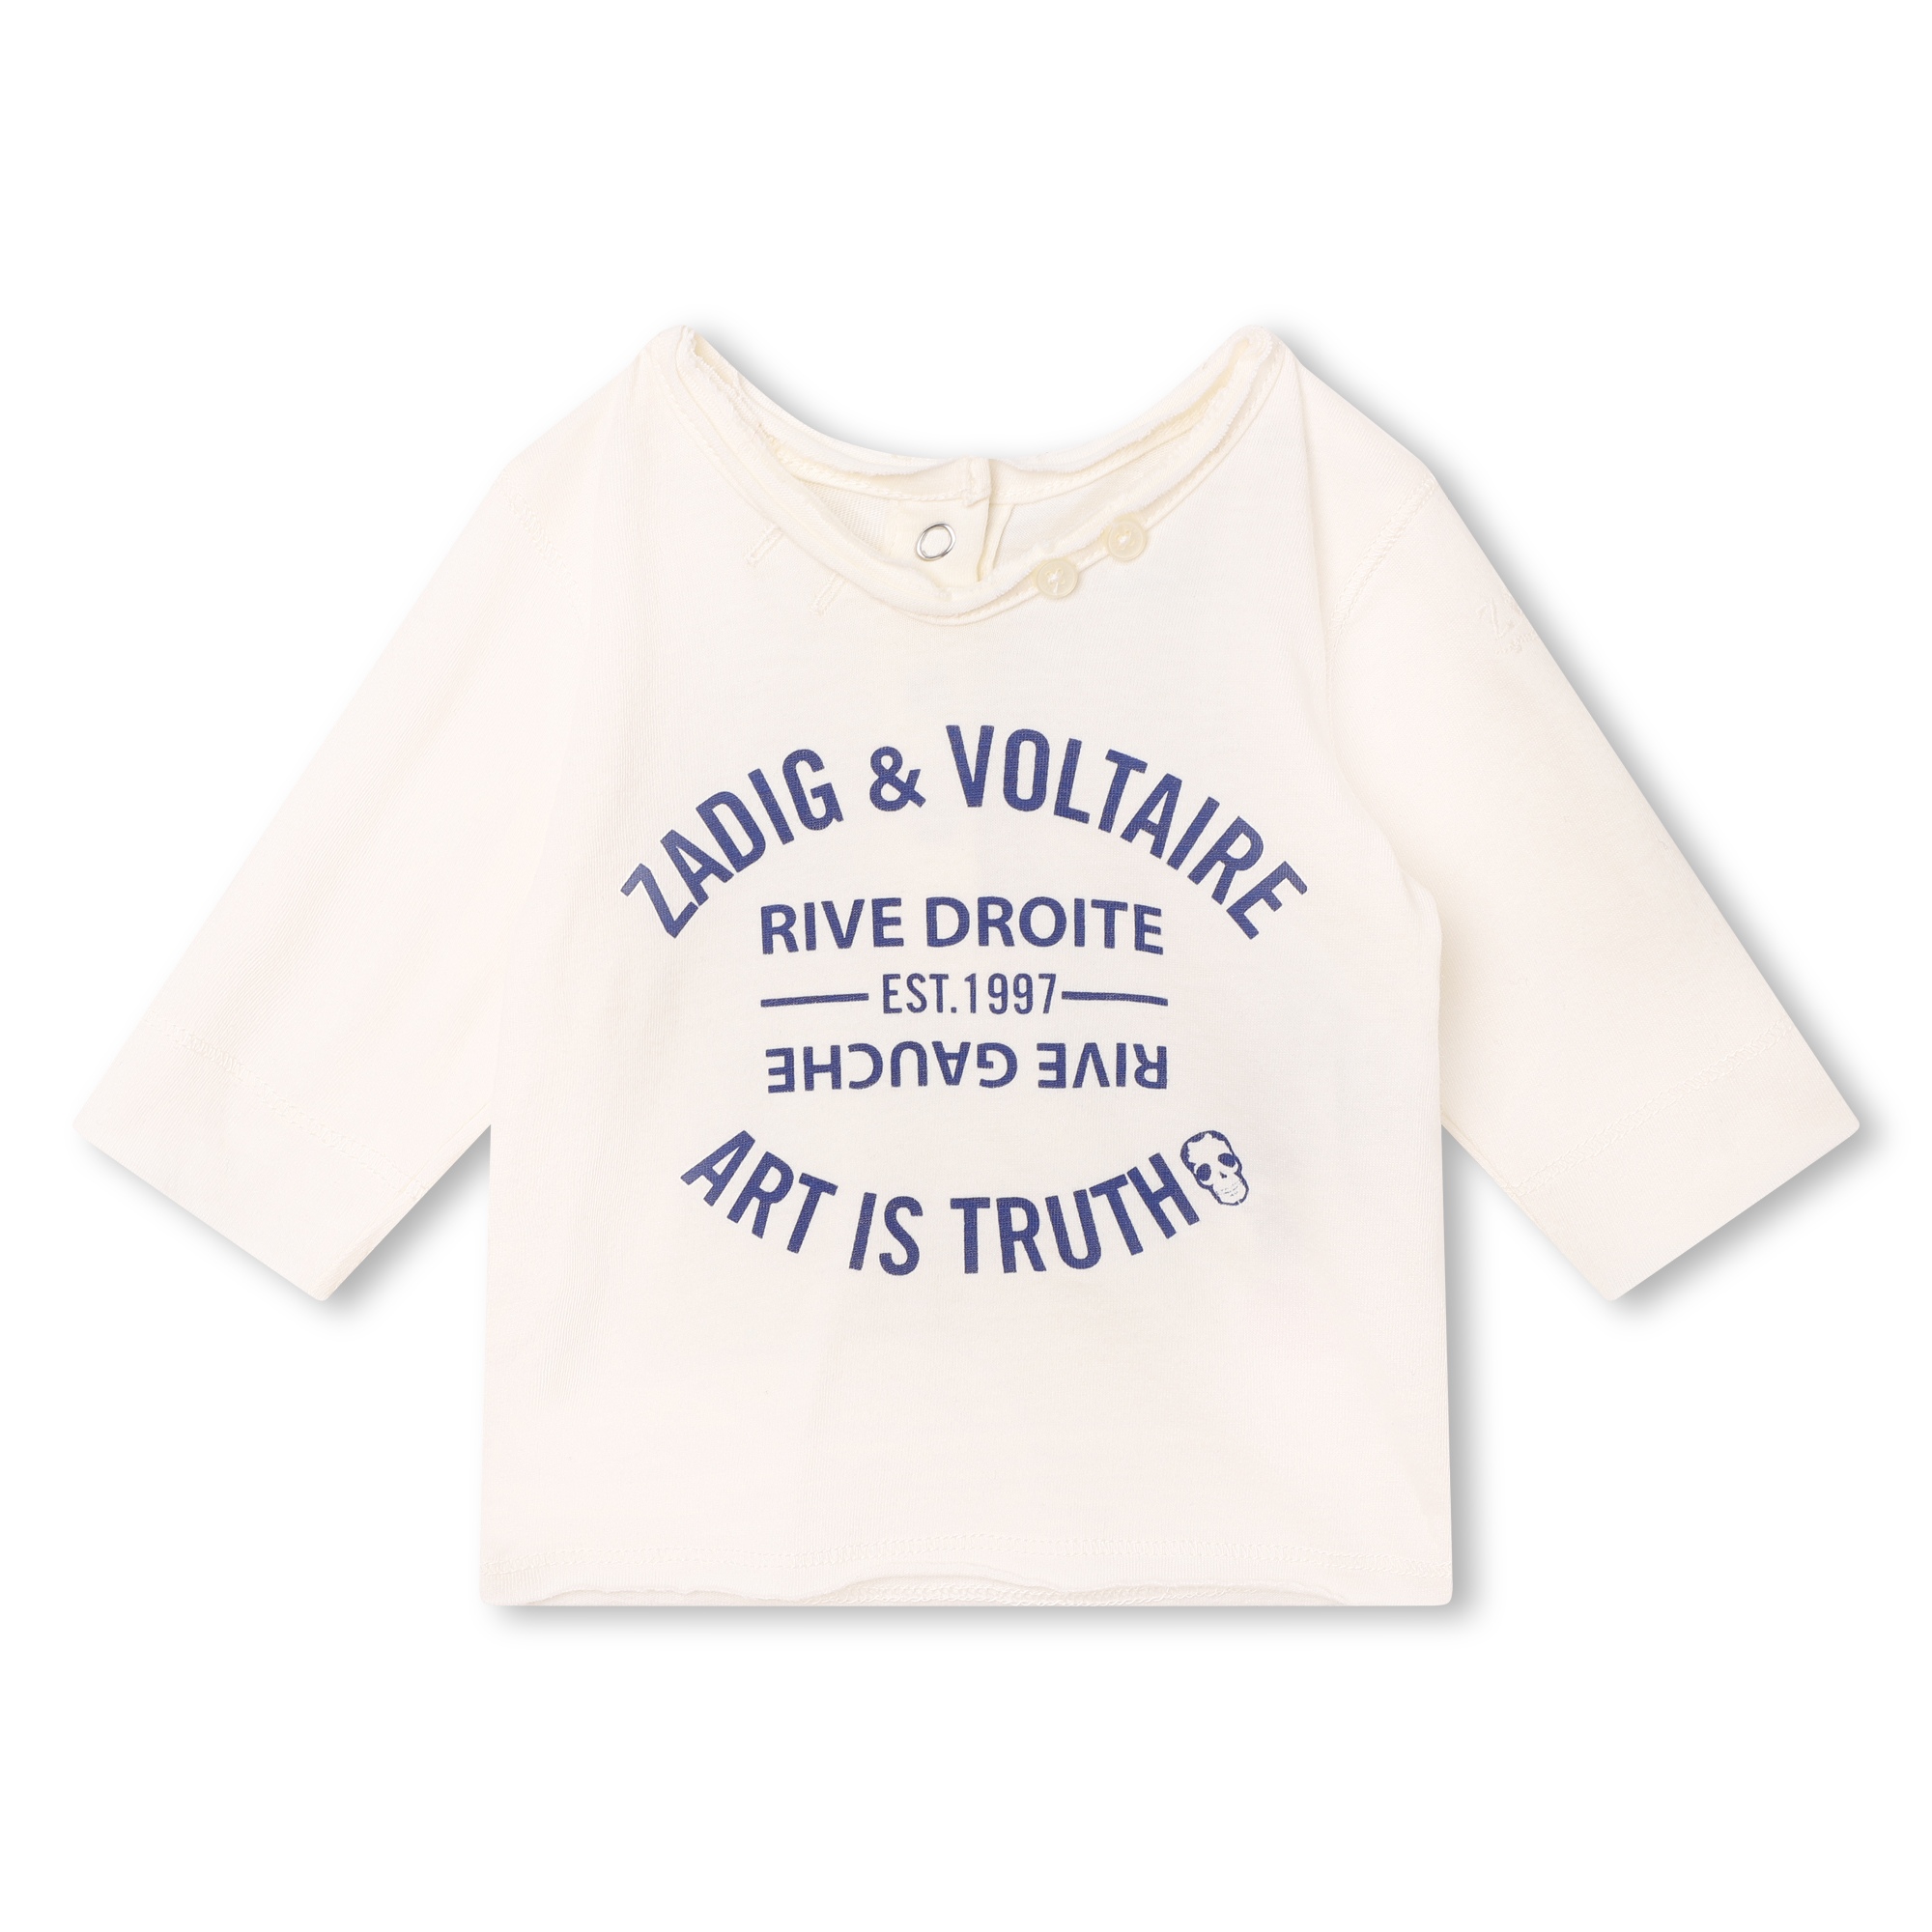 T-shirt and trouser set ZADIG & VOLTAIRE for UNISEX